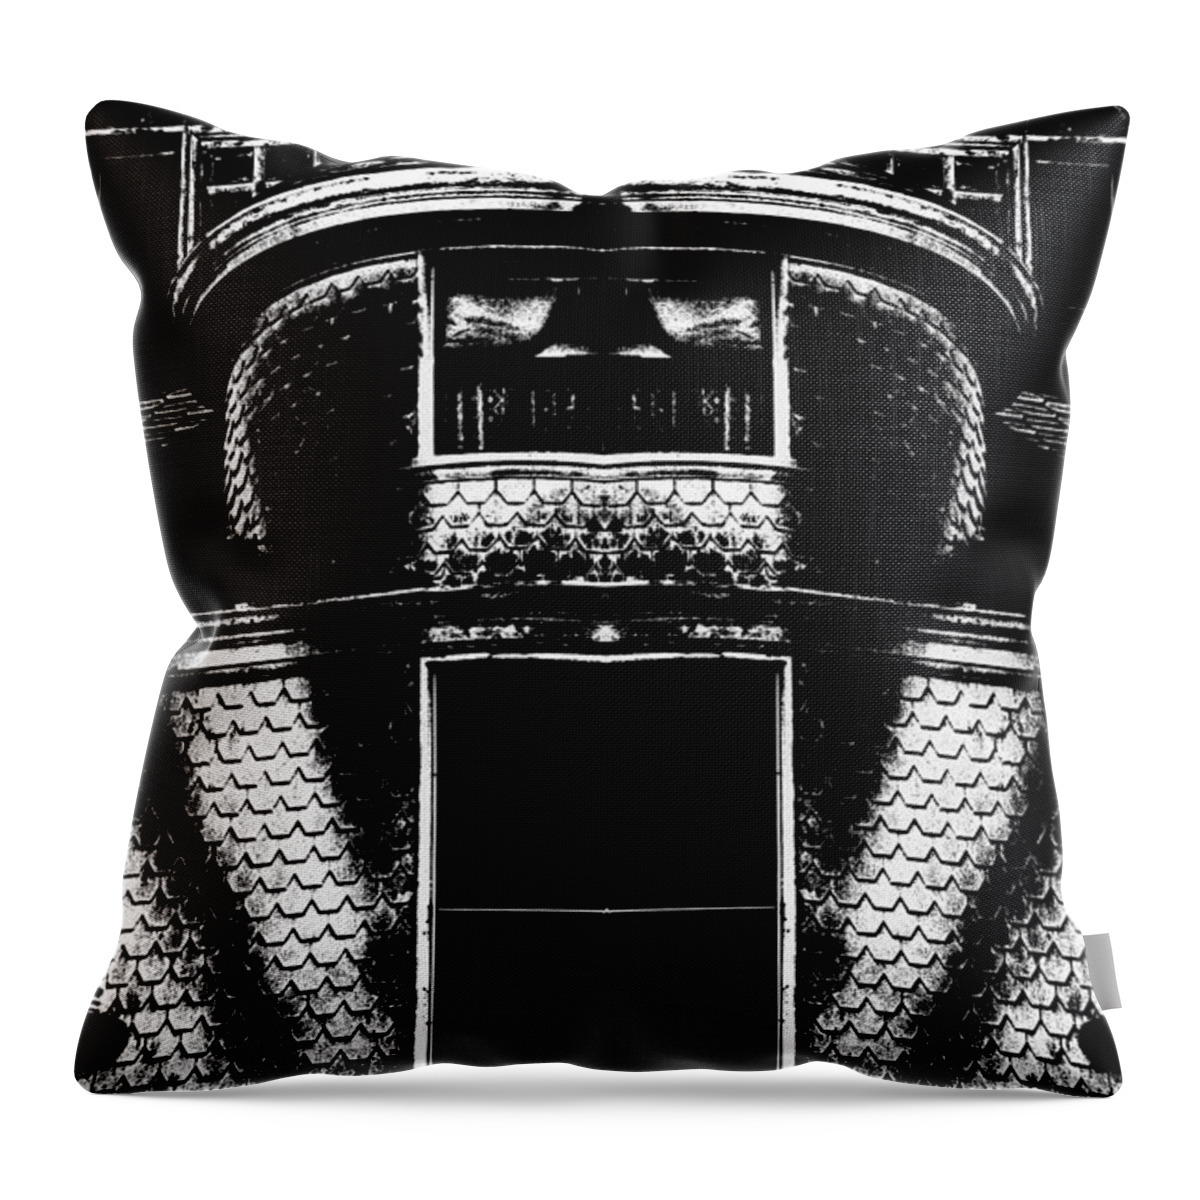 B&w Throw Pillow featuring the photograph Spirit House 2 by Paul W Faust - Impressions of Light